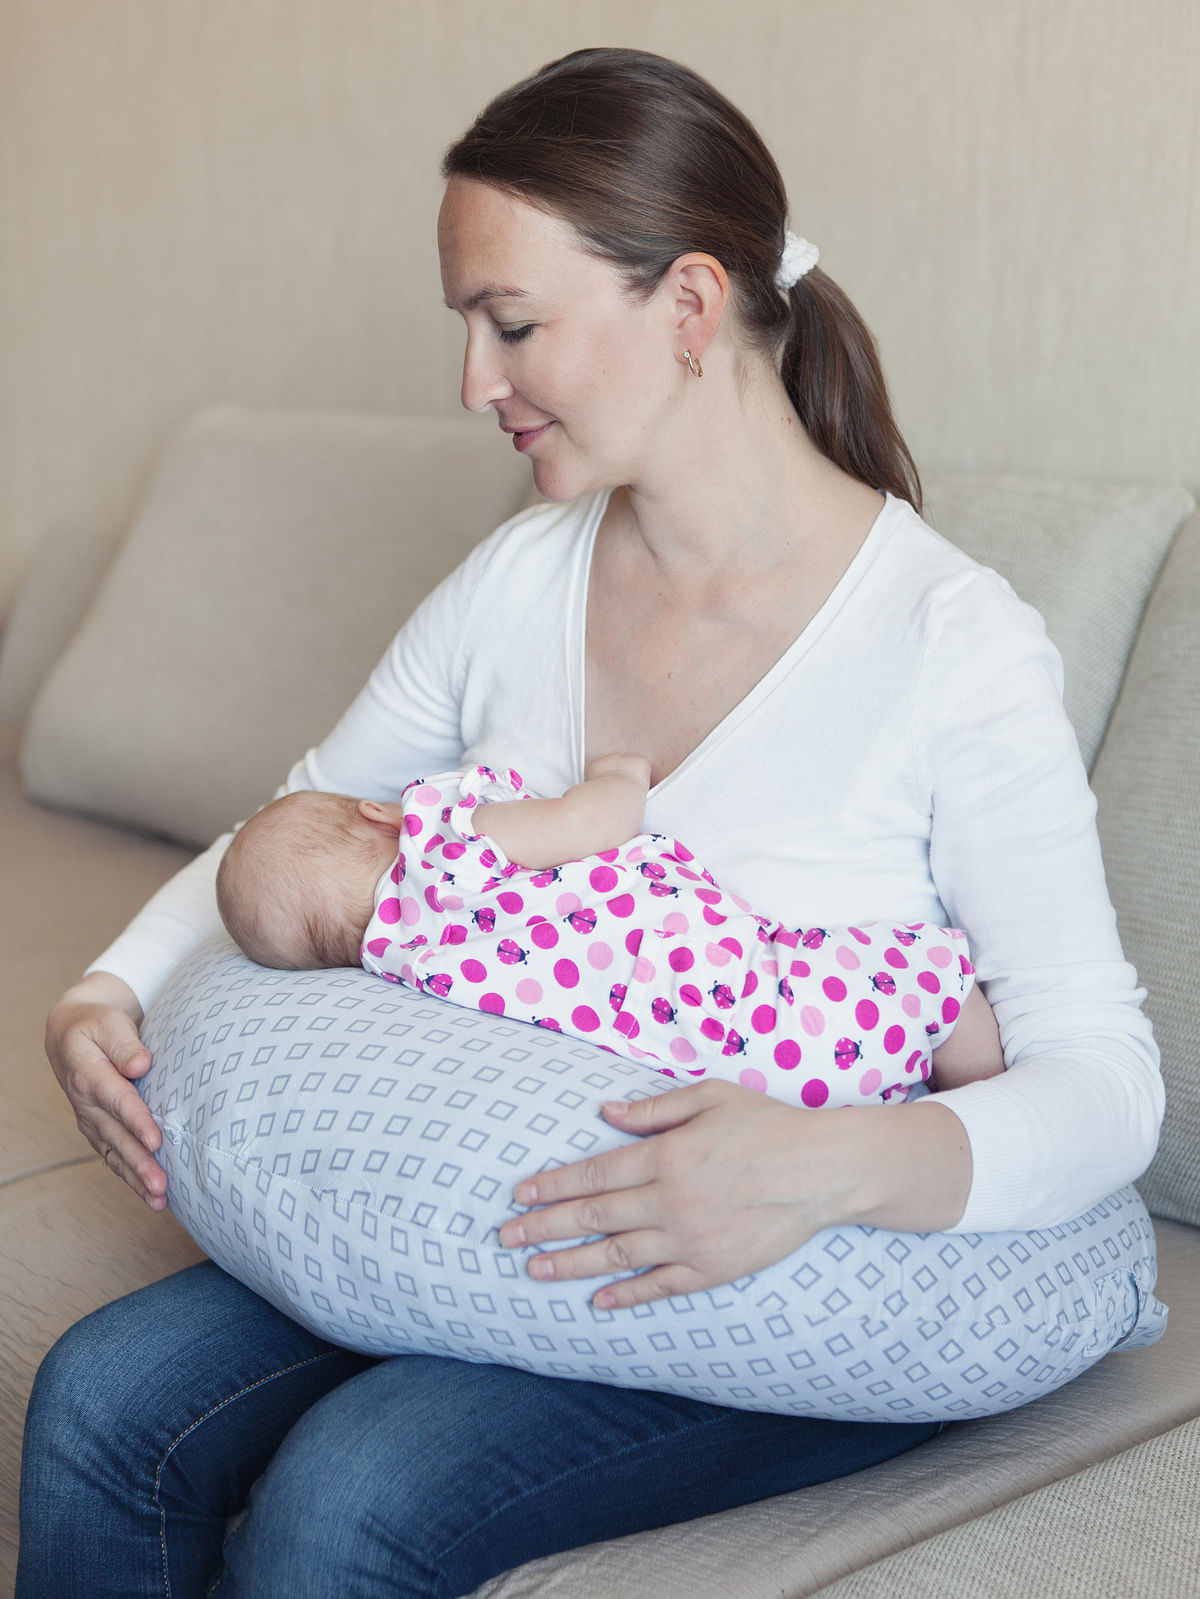 Here’re accessories new mothers should know about so that their new journey is smooth.